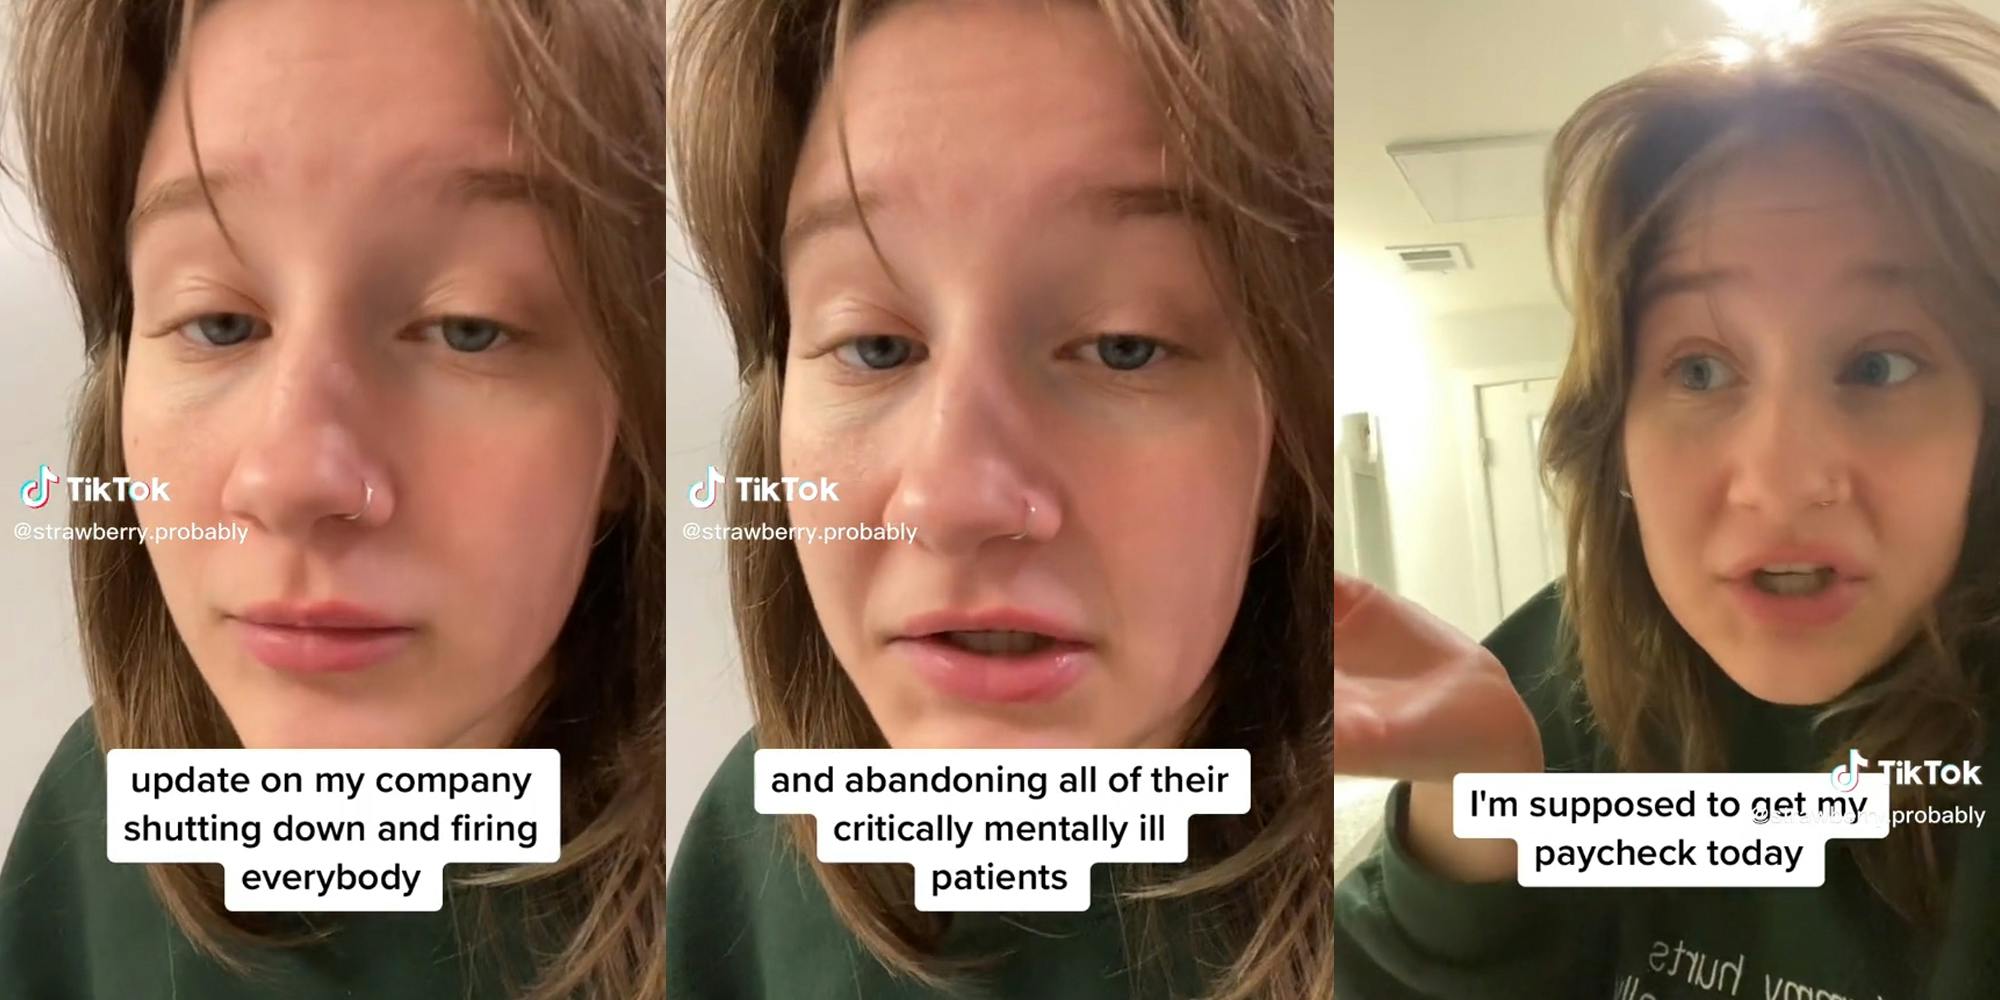 young woman with captions "update on my company shutting down and firing everybody and abandoning all of their critically mentally ill patients" and "i'm supposed to get my paycheck today"